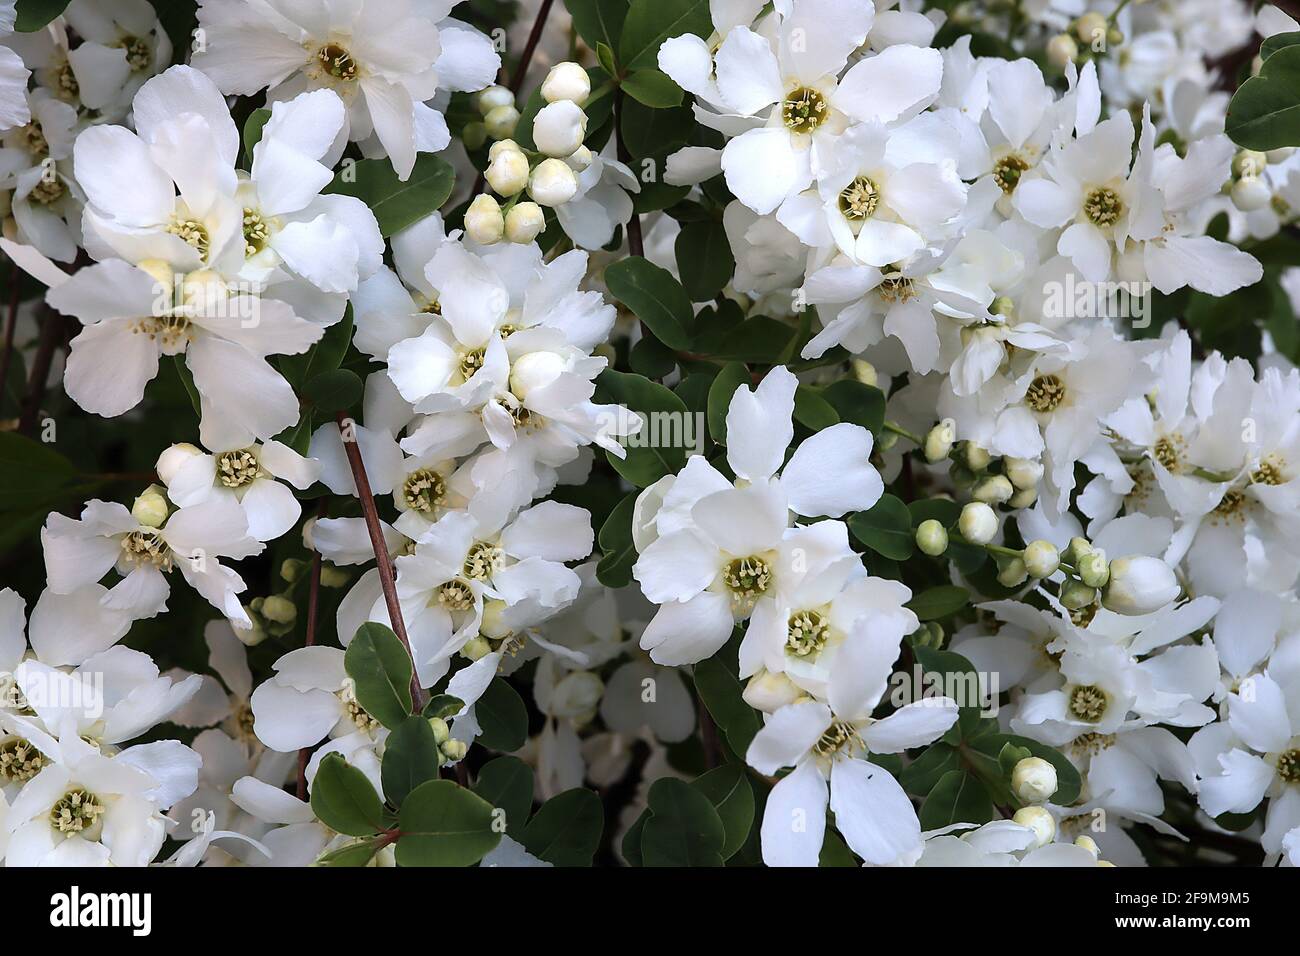 Exochorda x macrantha ‘The Bride’ pearlbush The Bride – masses of white cup-shaped flowers on arching branches,  April, England, UK Stock Photo